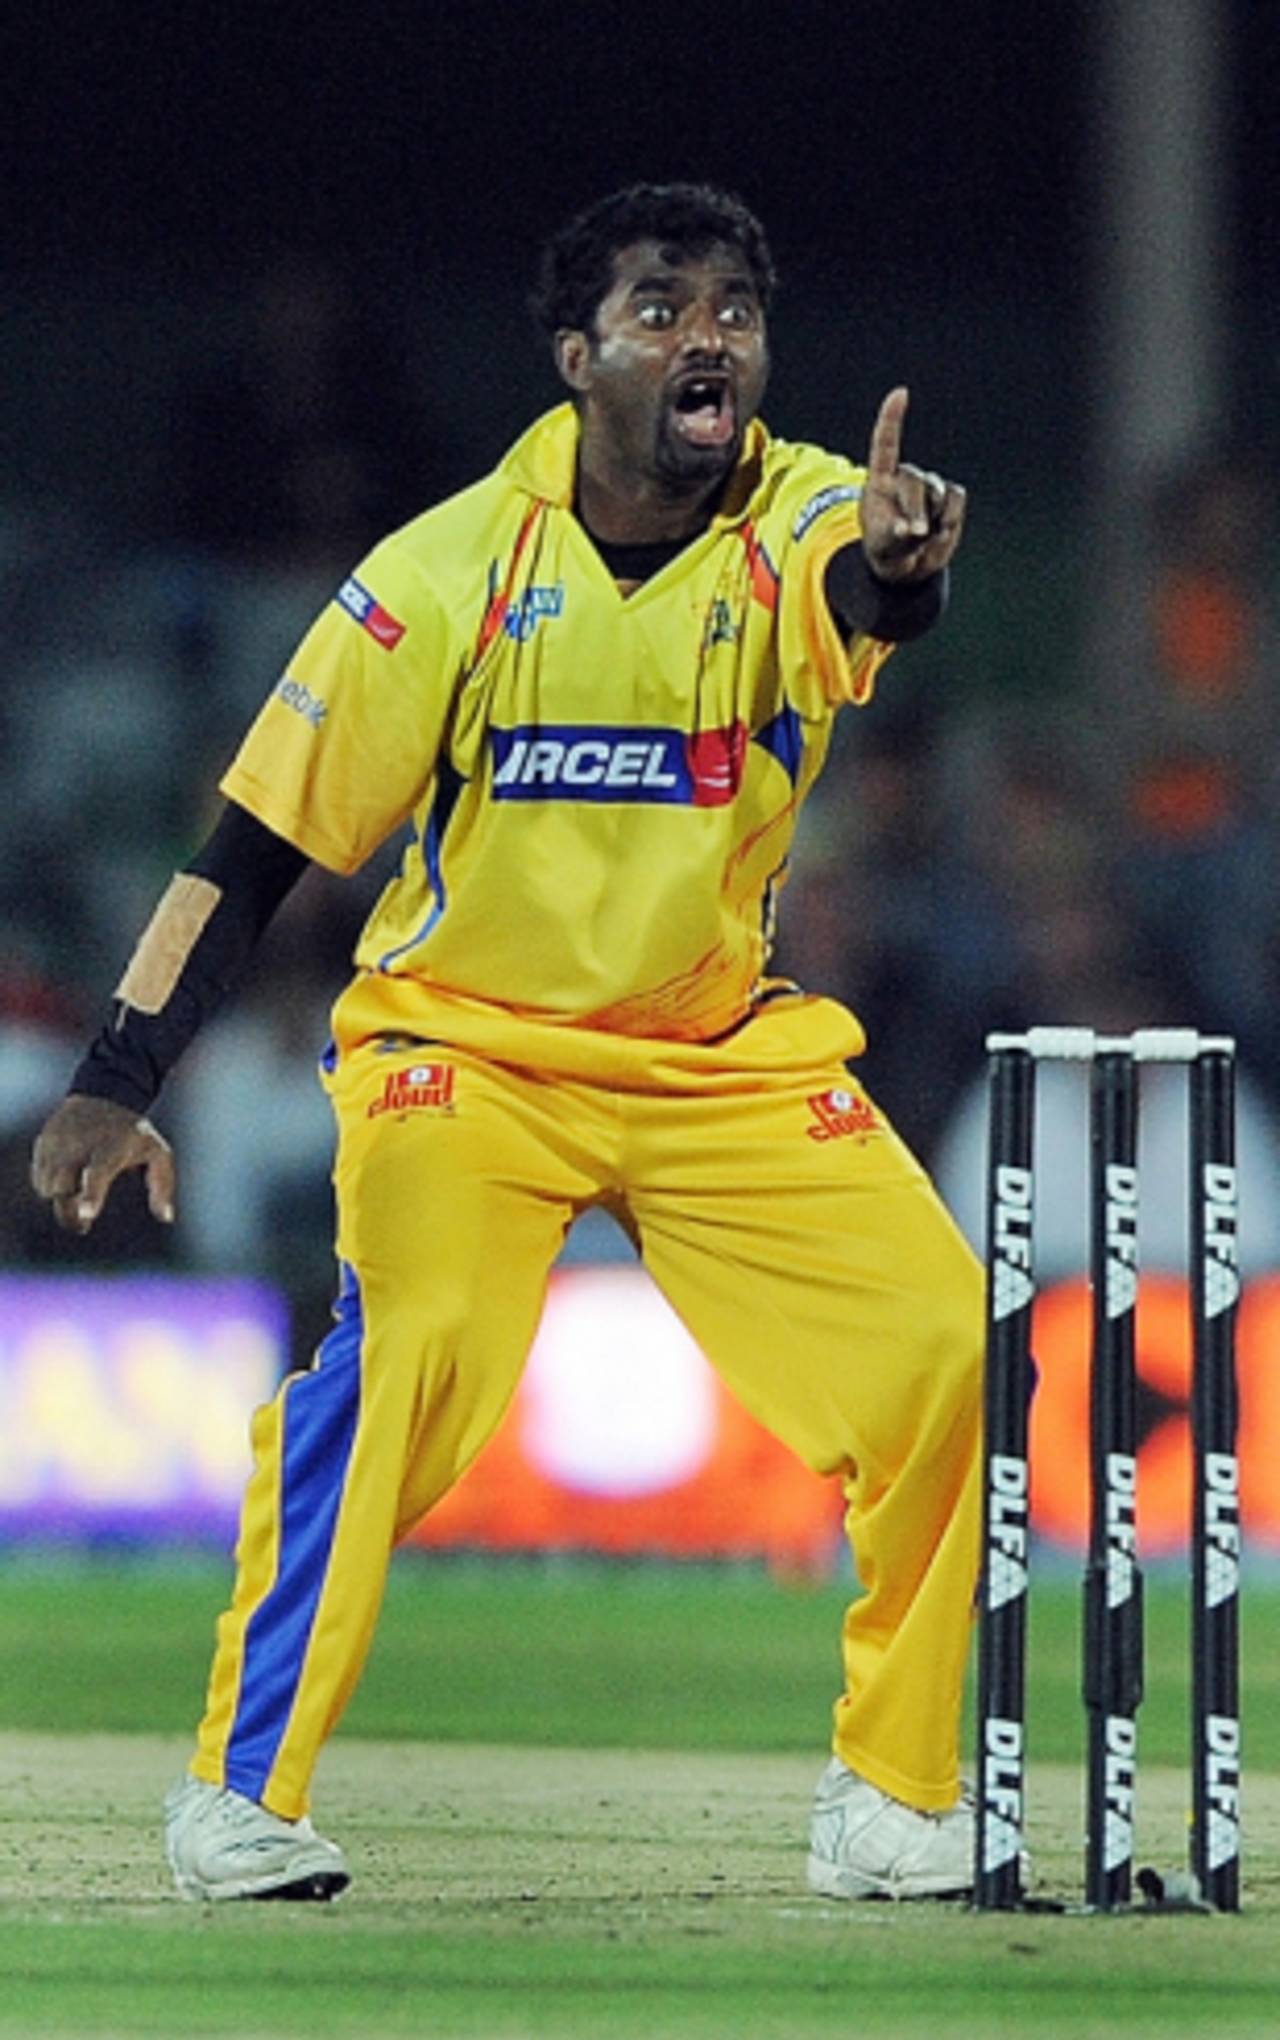 Muttiah Muralitharan appeals successfully for a caught behind off T Suman, Chennai Super Kings v Deccan Chargers, IPL, 29th match, East London, May 4, 2009